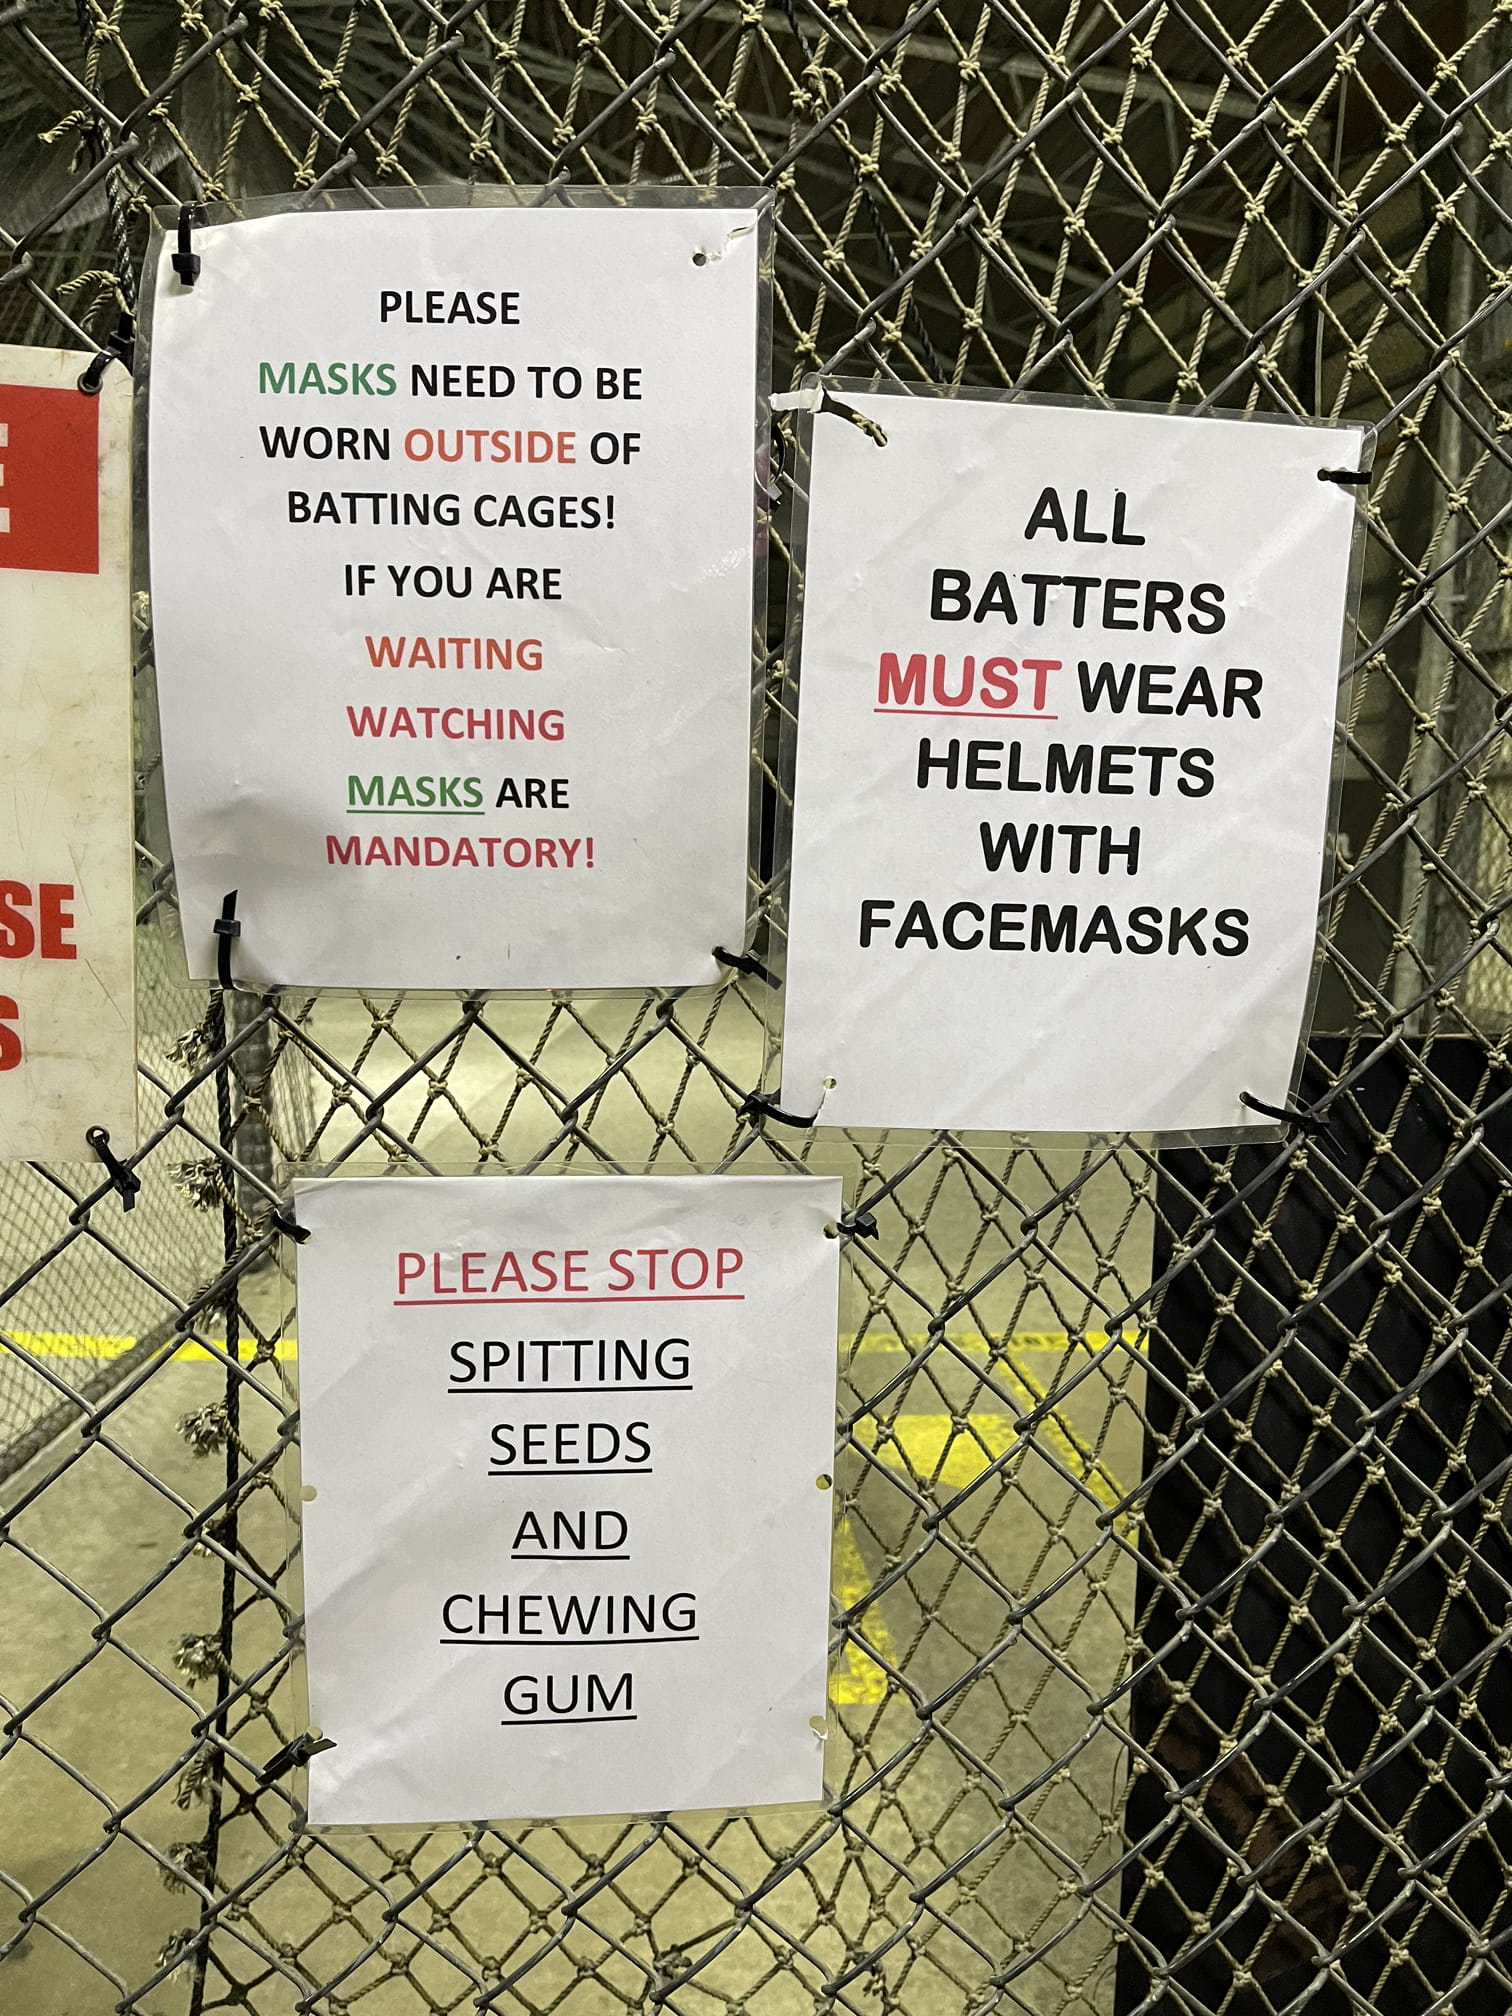 Lot of signs outside the cages